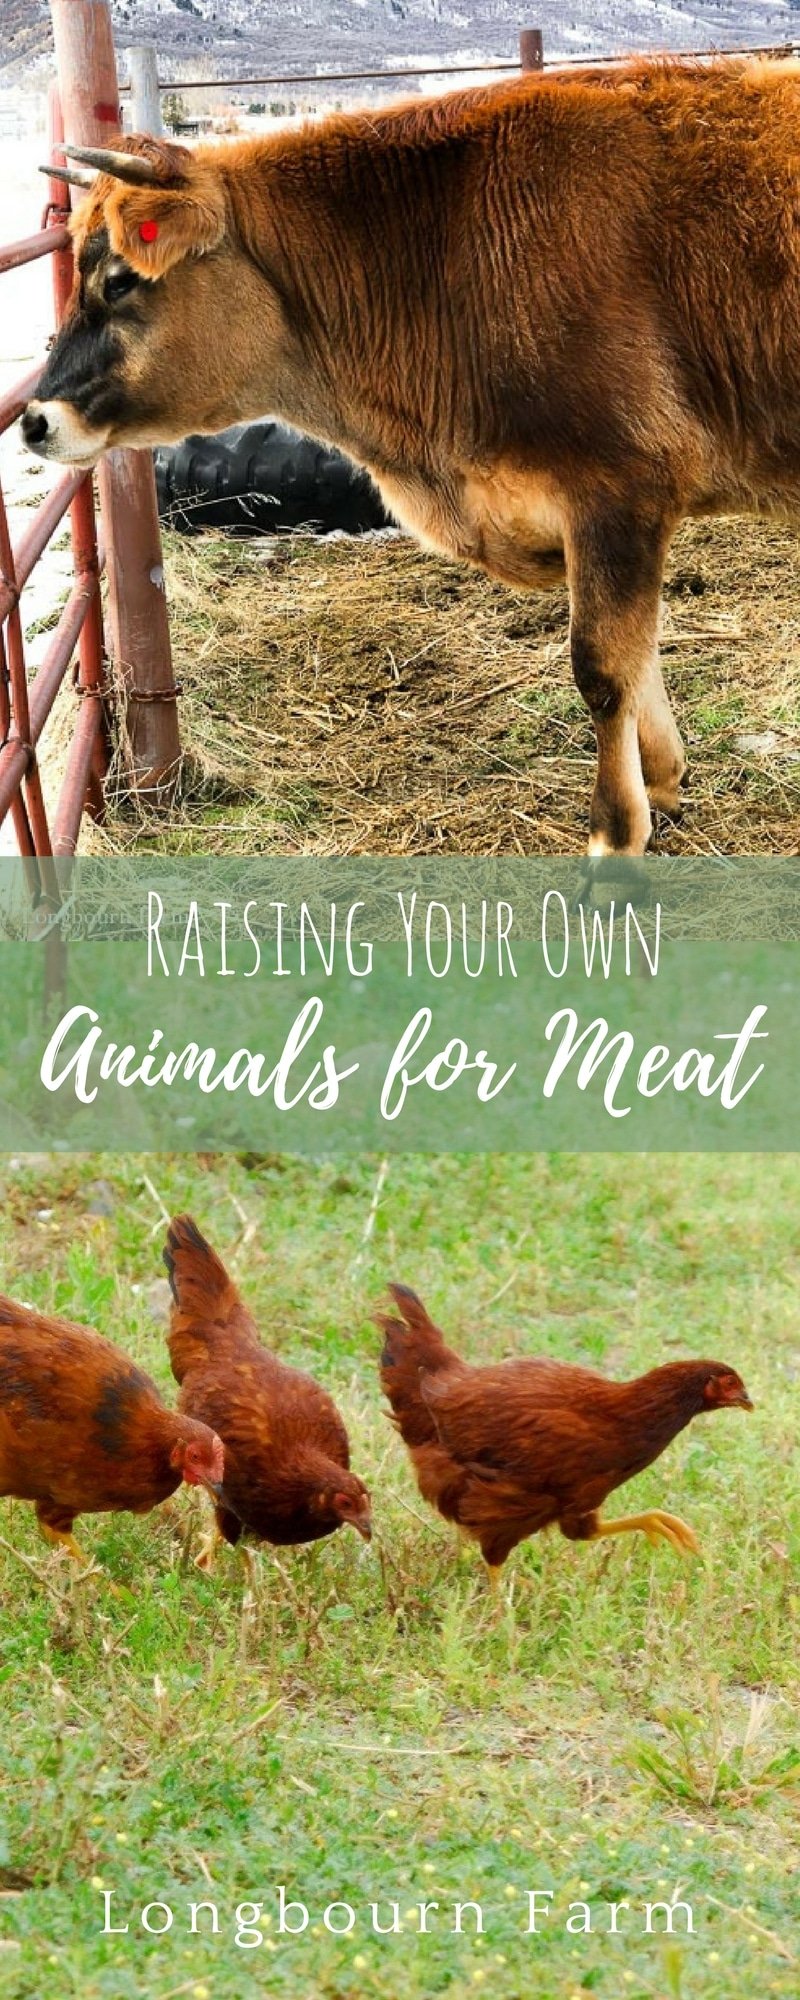 I often get asked how I am comfortable raising animals for food. Here is my long and honest answer about how we feel raising animals for food on our farm.